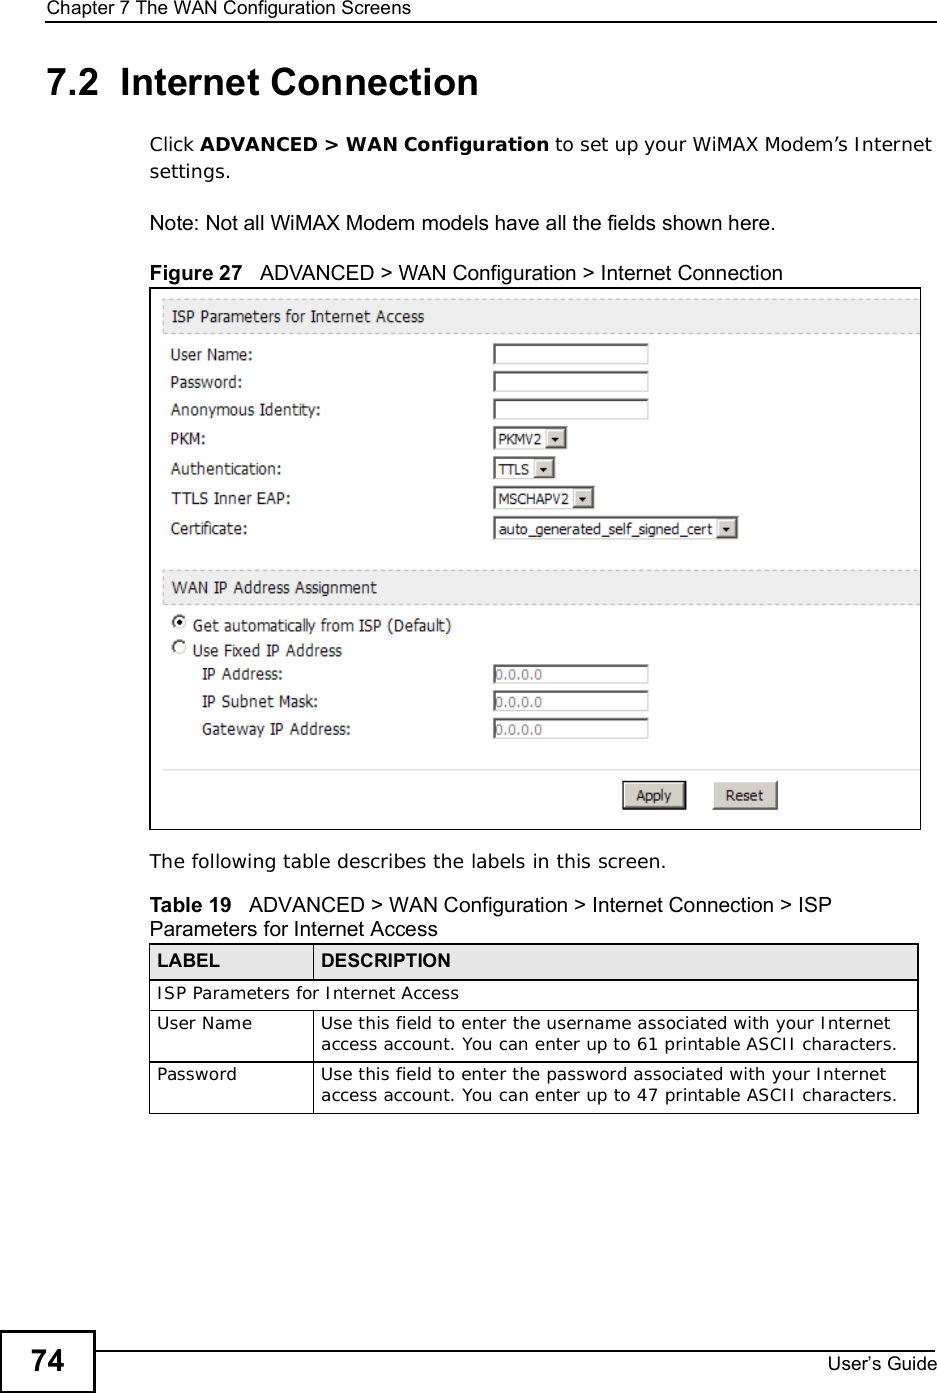 Chapter 7The WAN Configuration ScreensUser s Guide747.2  Internet ConnectionClick ADVANCED &gt; WAN Configuration to set up your WiMAX Modem’s Internet settings.Note: Not all WiMAX Modem models have all the fields shown here.Figure 27   ADVANCED &gt; WAN Configuration &gt; Internet ConnectionThe following table describes the labels in this screen.  Table 19   ADVANCED &gt; WAN Configuration &gt; Internet Connection &gt; ISP Parameters for Internet AccessLABEL DESCRIPTIONISP Parameters for Internet AccessUser NameUse this field to enter the username associated with your Internet access account. You can enter up to 61 printable ASCII characters.PasswordUse this field to enter the password associated with your Internet access account. You can enter up to 47 printable ASCII characters.